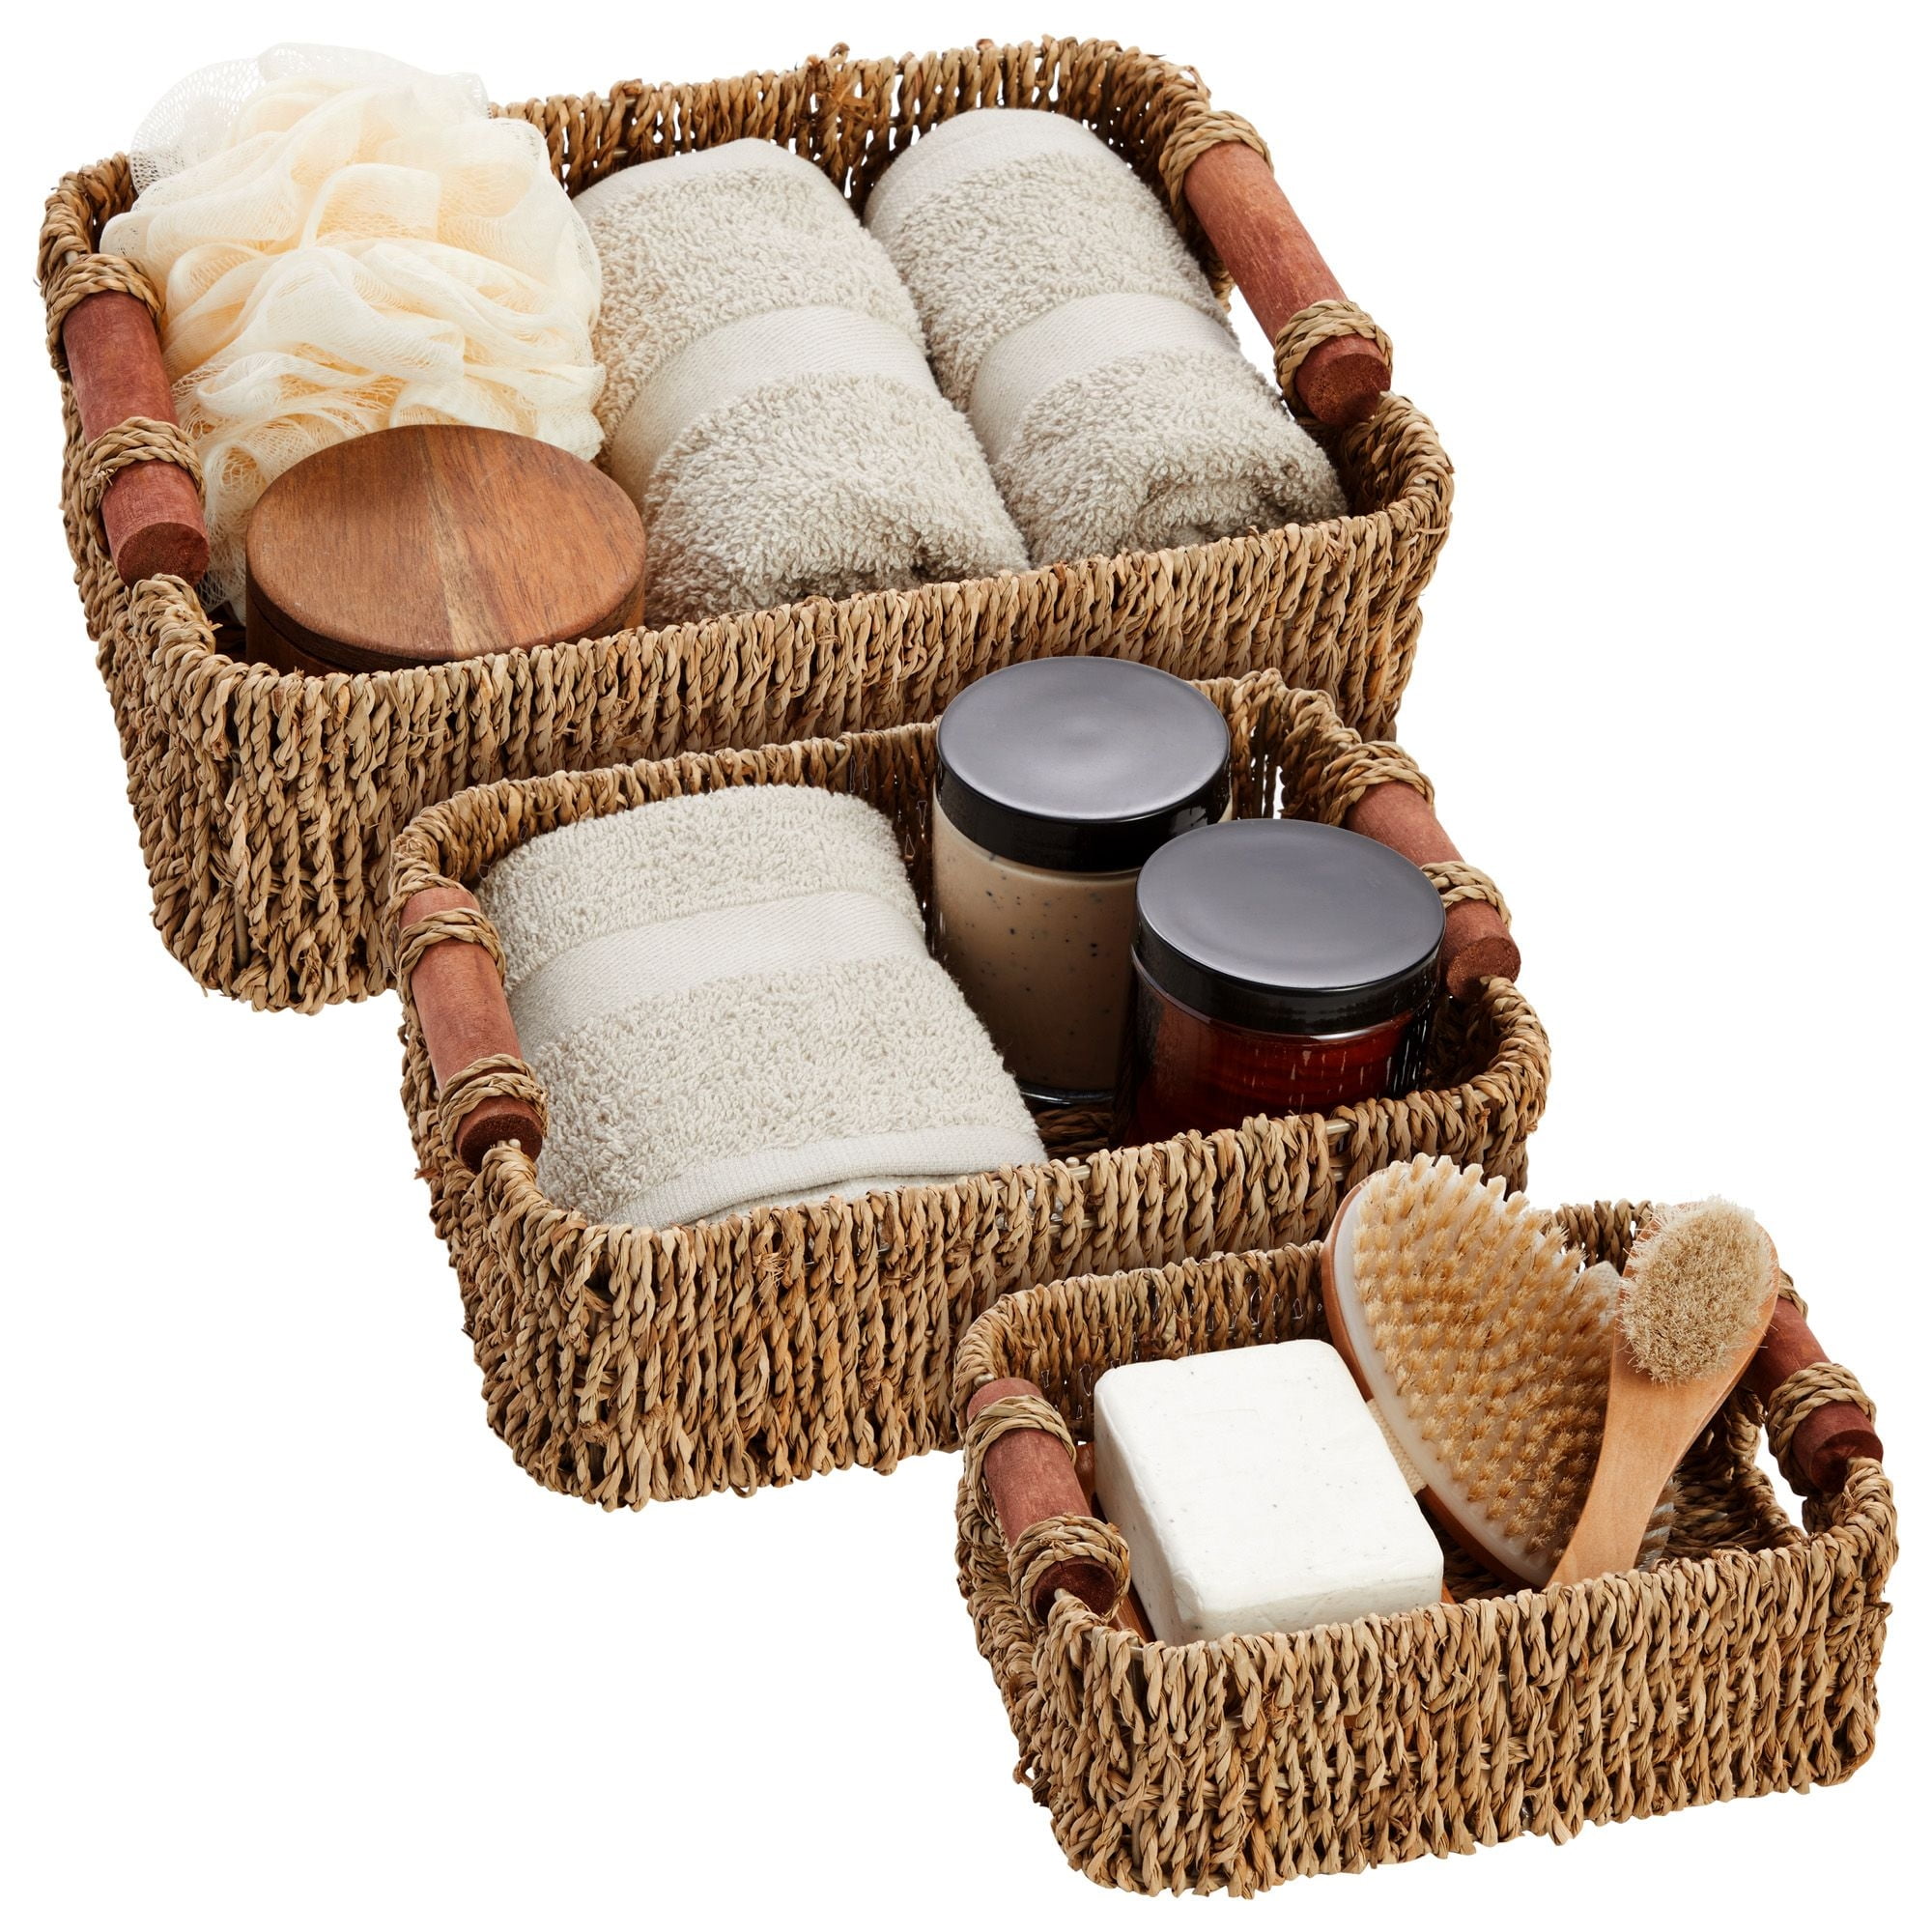 Set of 3 Small Wicker Baskets for Storage, Woven Nesting Bins with Handles  for Bathroom Towels and Toilet Paper Organization, Closet, Shelf, Kitchen